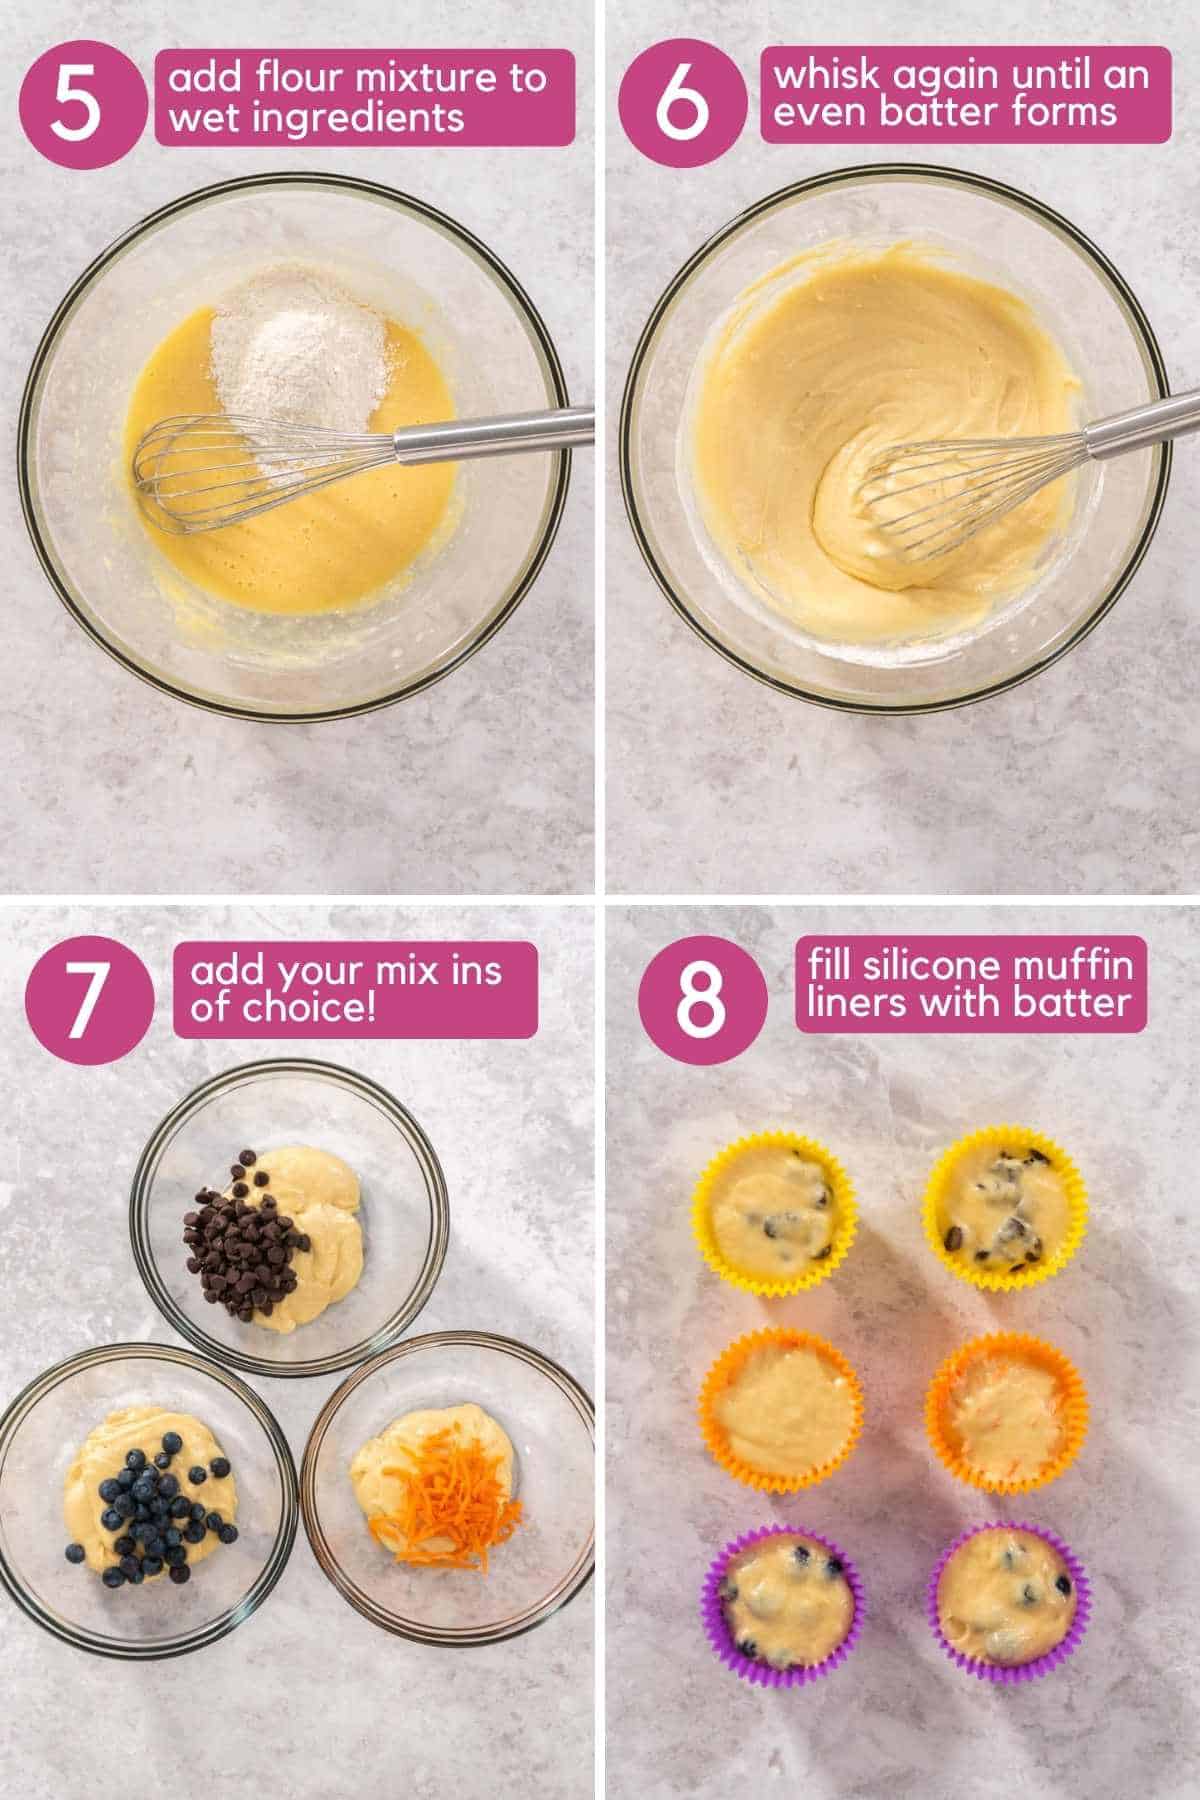 How to mix air fryer muffin batter and put in silicone liners.